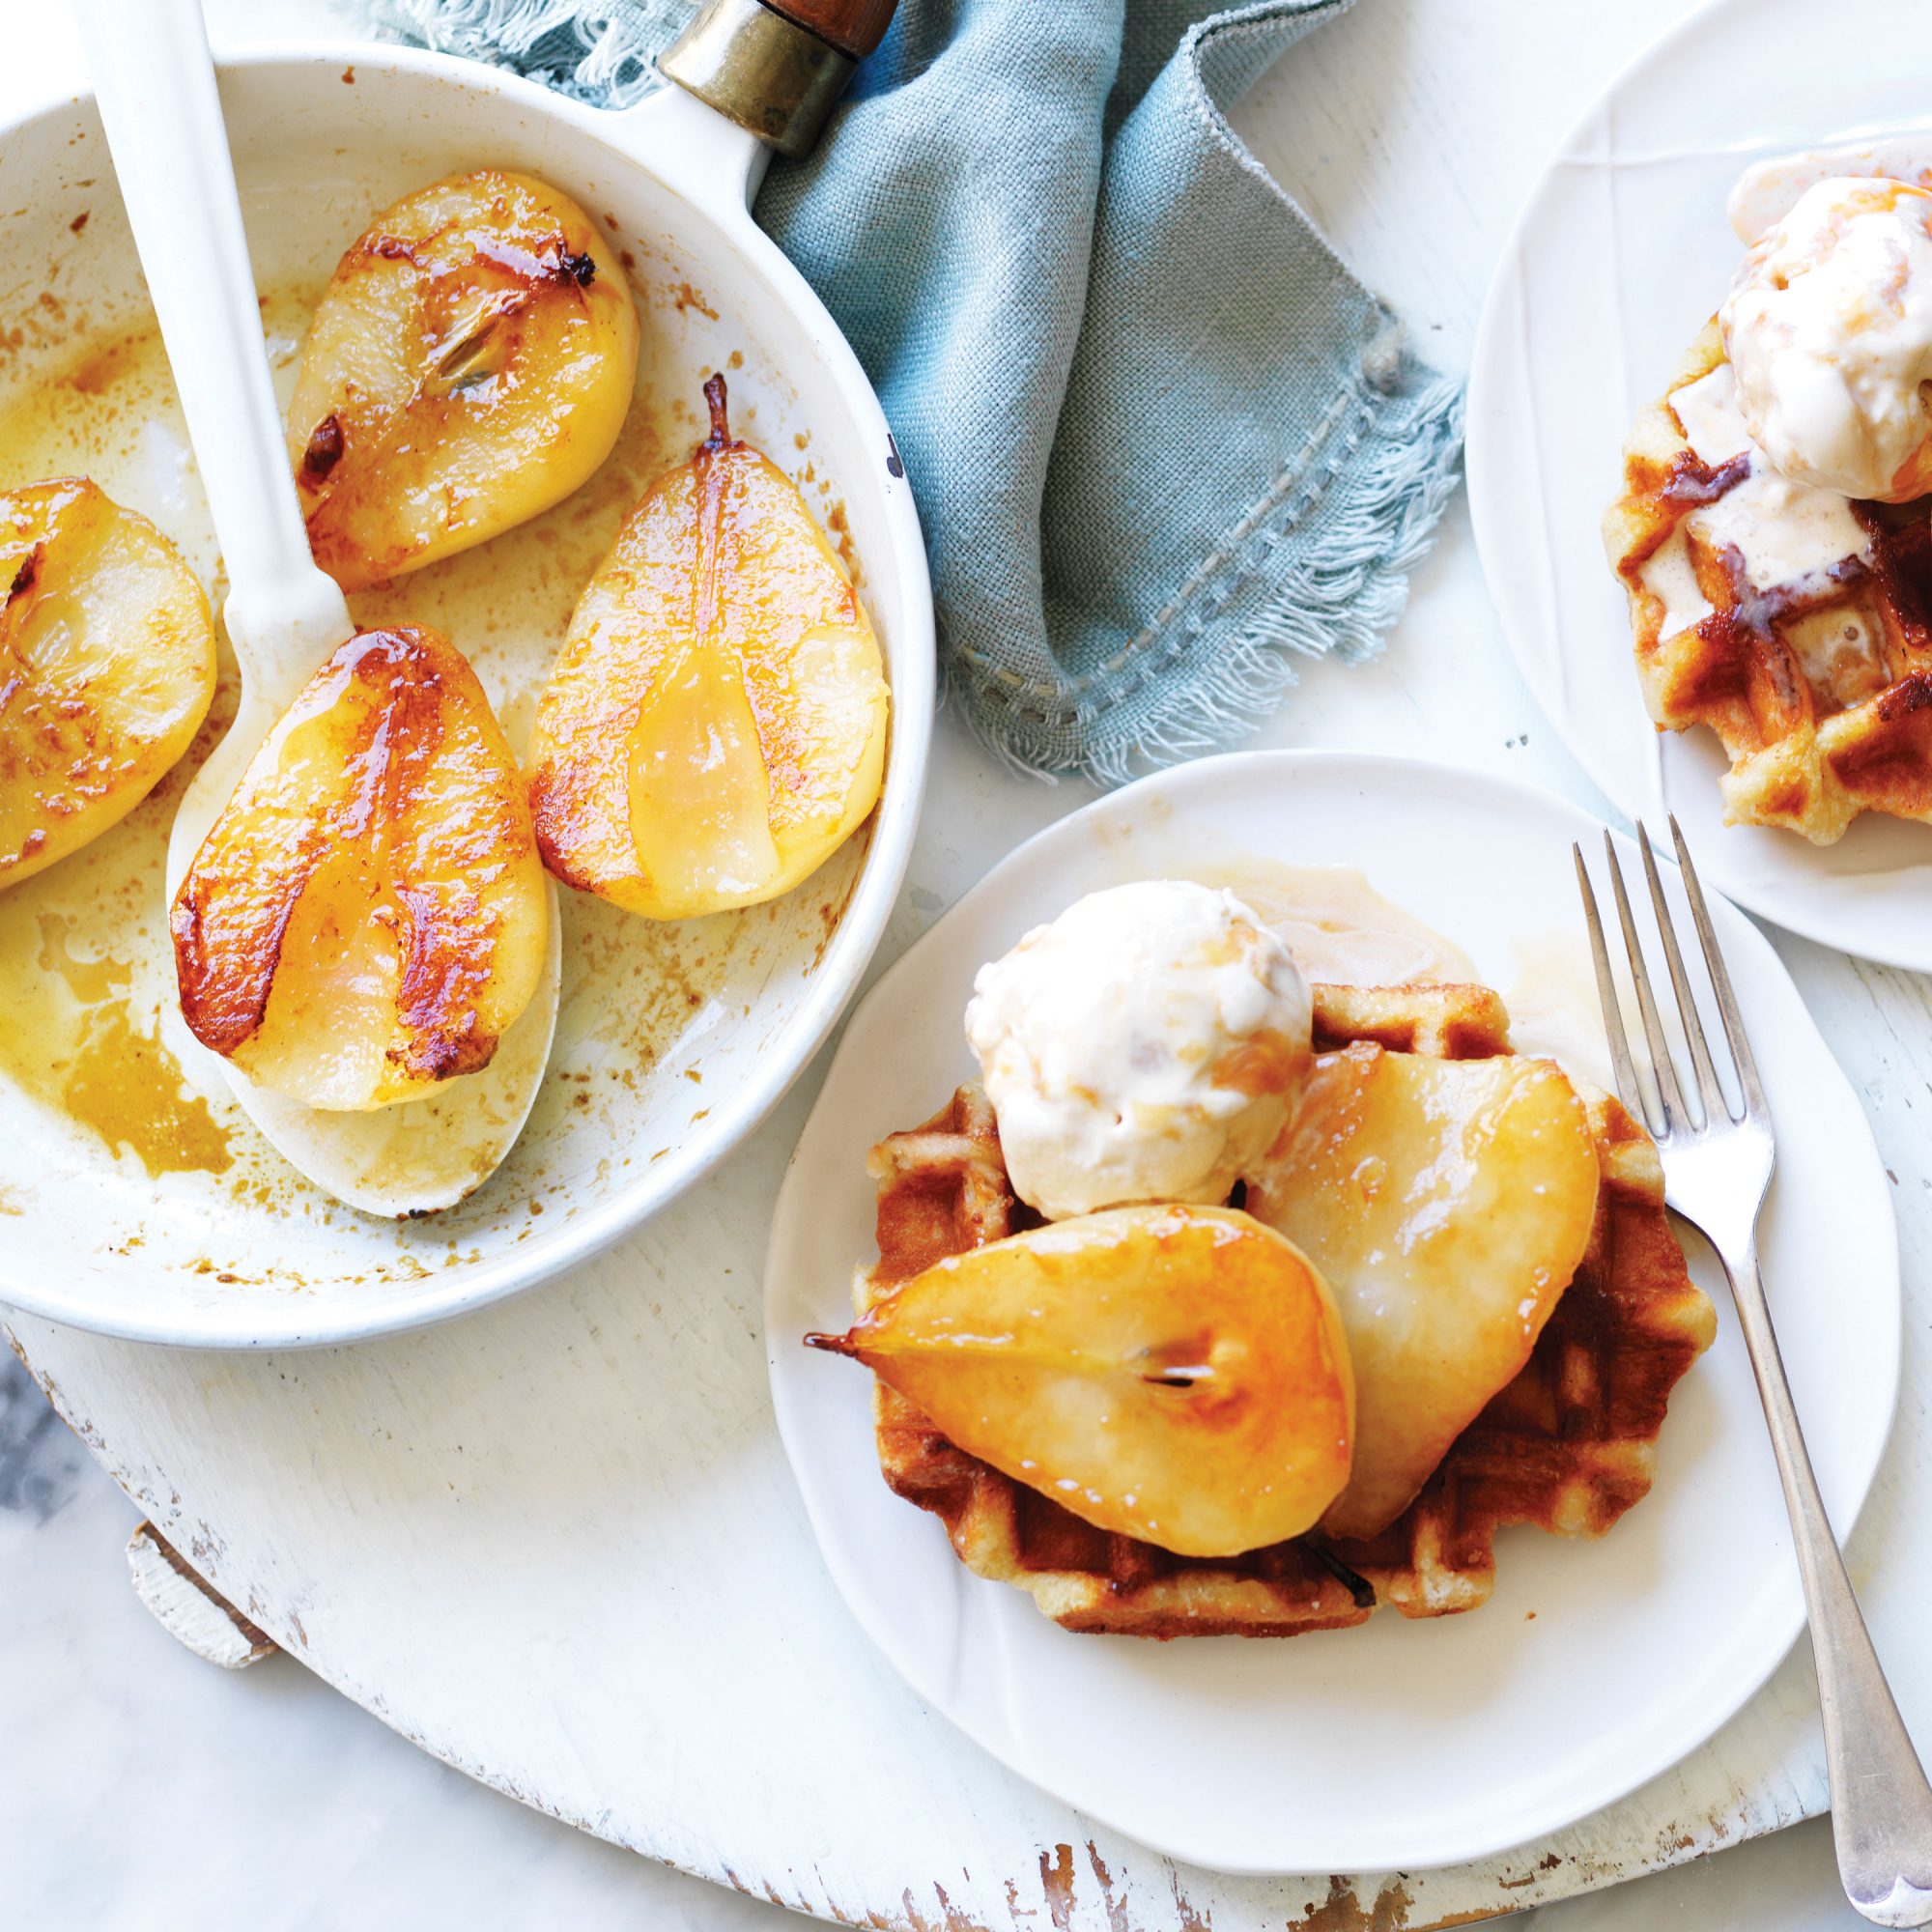 Waffles with caramel ice cream and pears